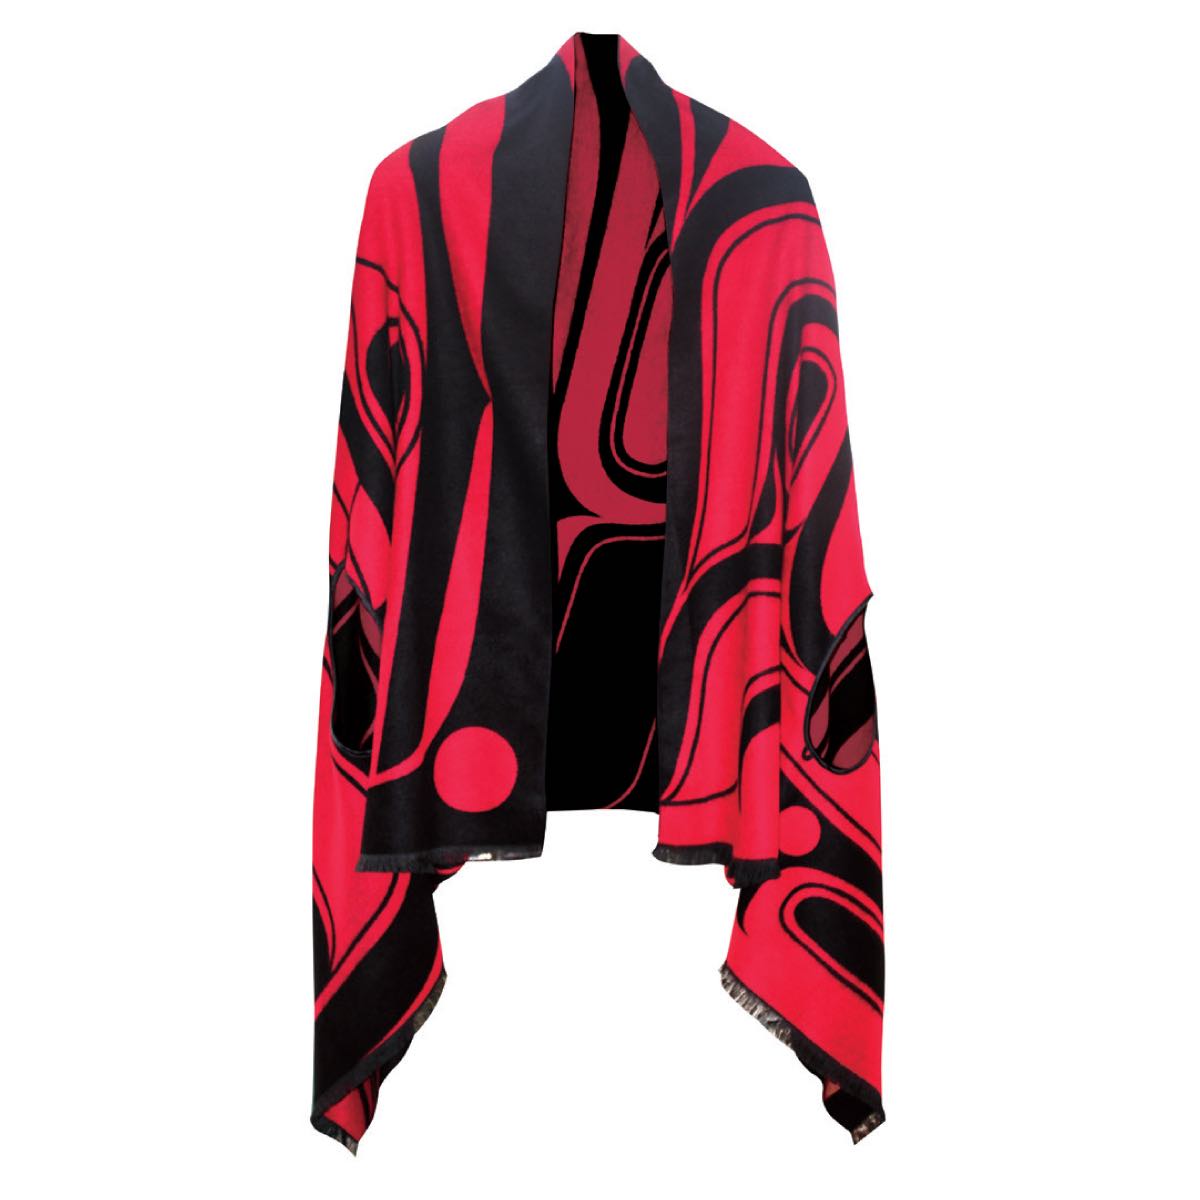 REVERSIBLE FASHION CAPES - Red Ryan Cranmer Tradition Red - CAPE12 - House of Himwitsa Native Art Gallery and Gifts